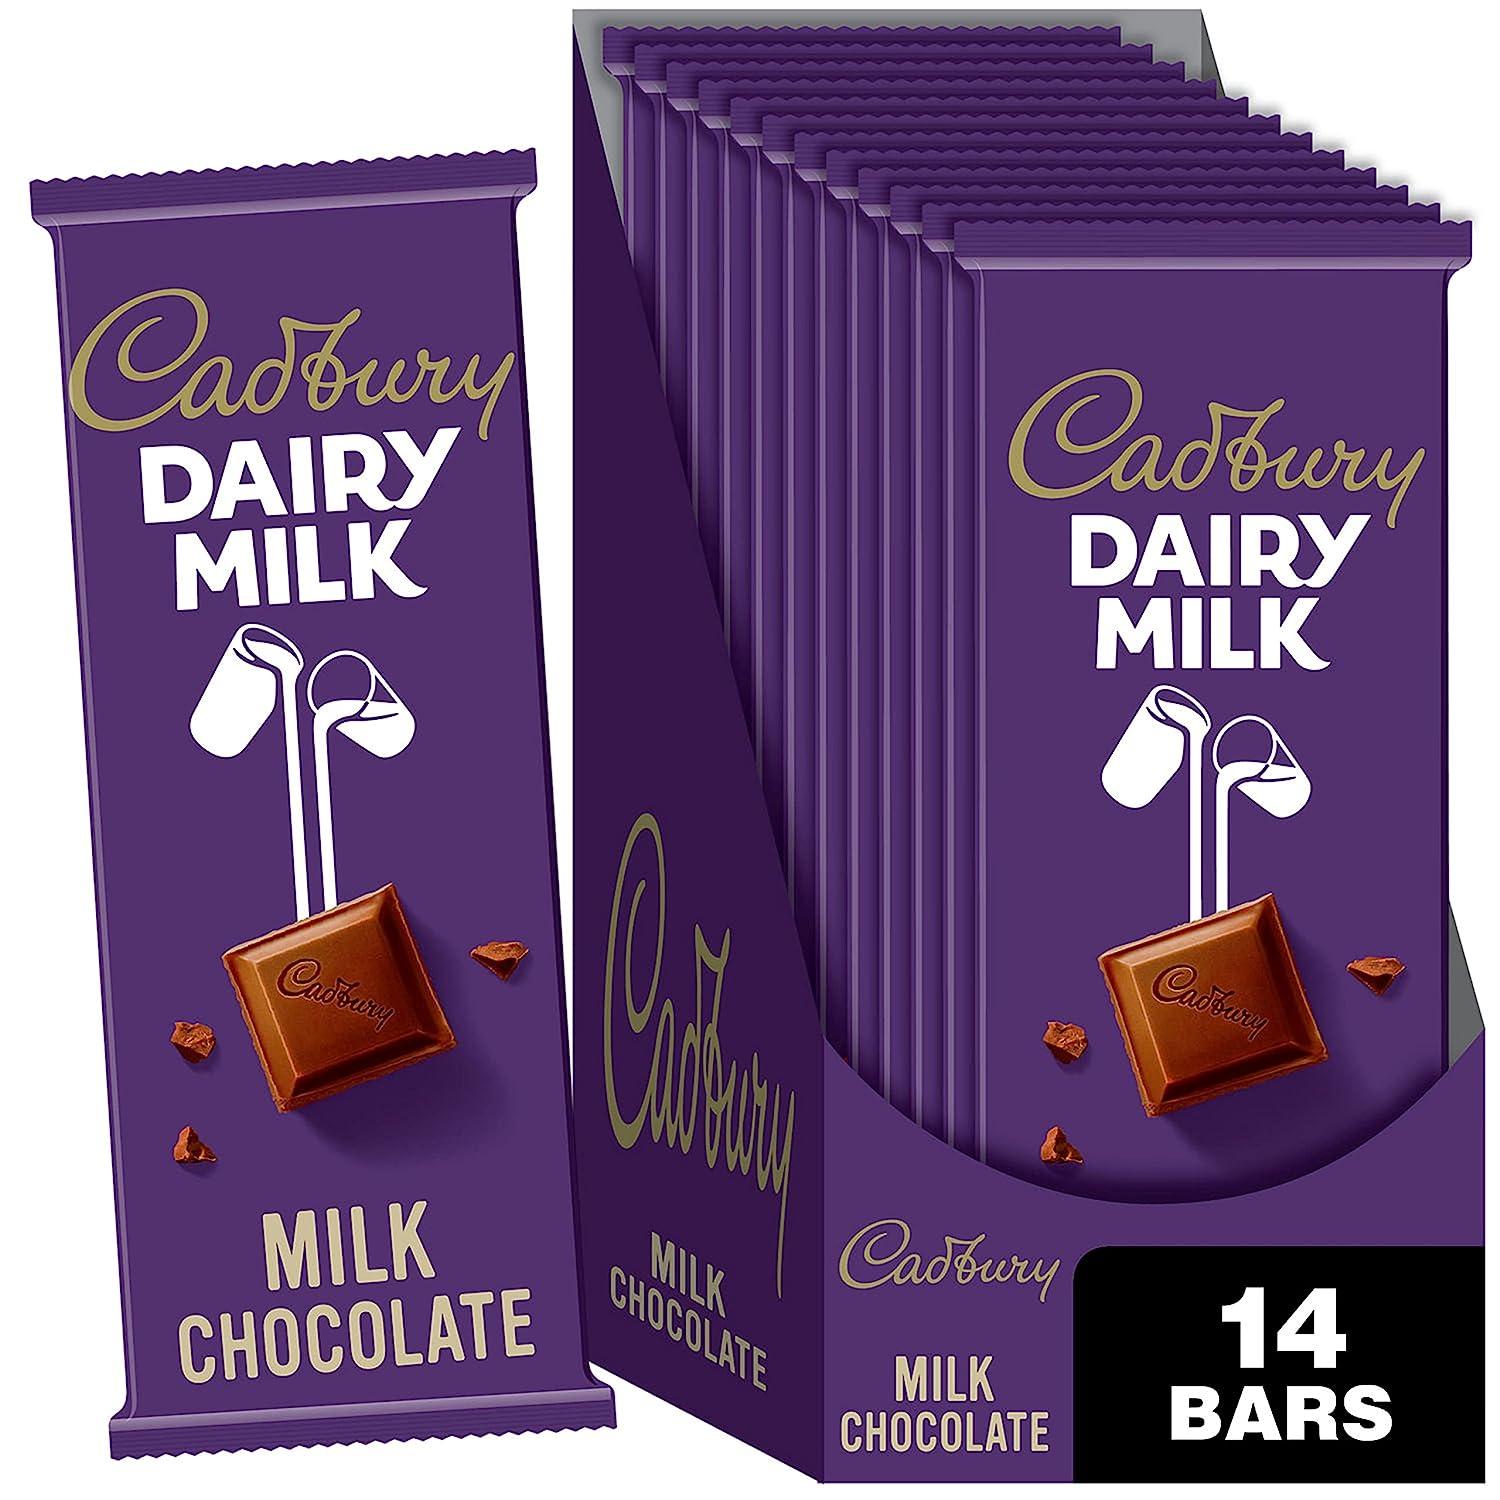 Cadbury Dairy Milk Chocolate Candy Bars 14 pack for $14.56 Shipped